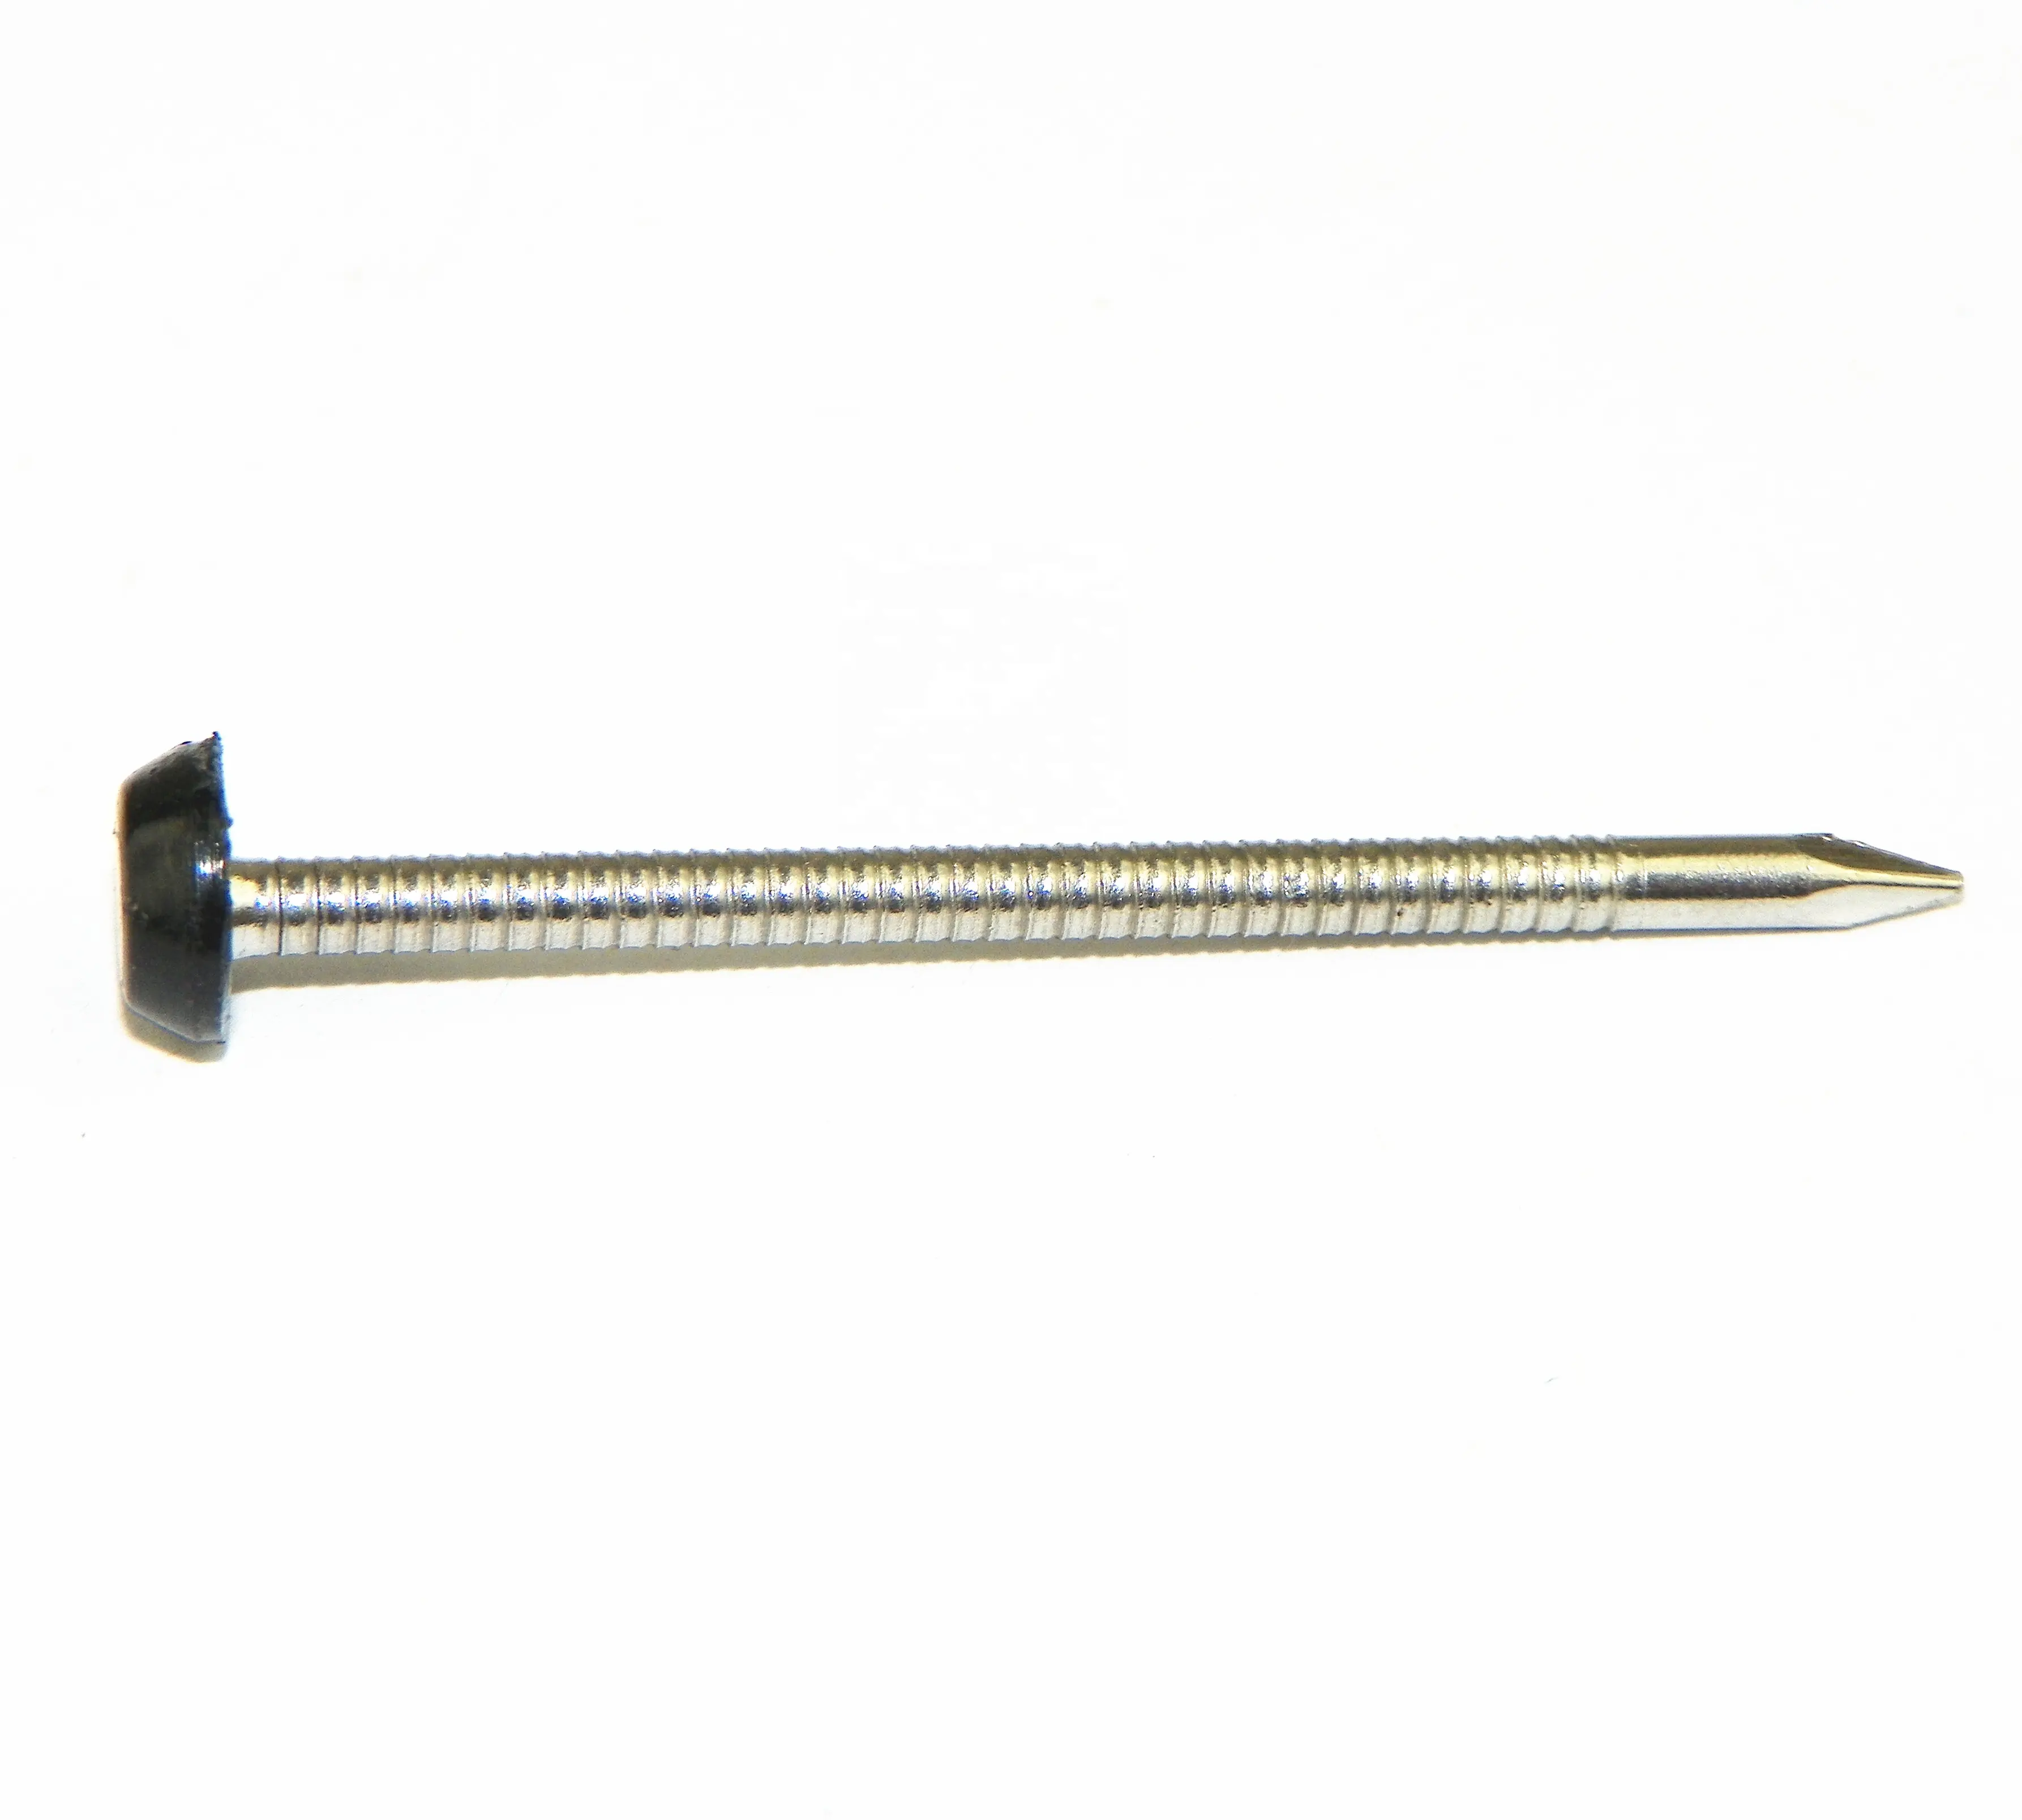 Plastic Cover head nails ss304 Plastic Head Pins PP Cap Nail sharp point ring shank Decorate Nails Real Manufacturer in China